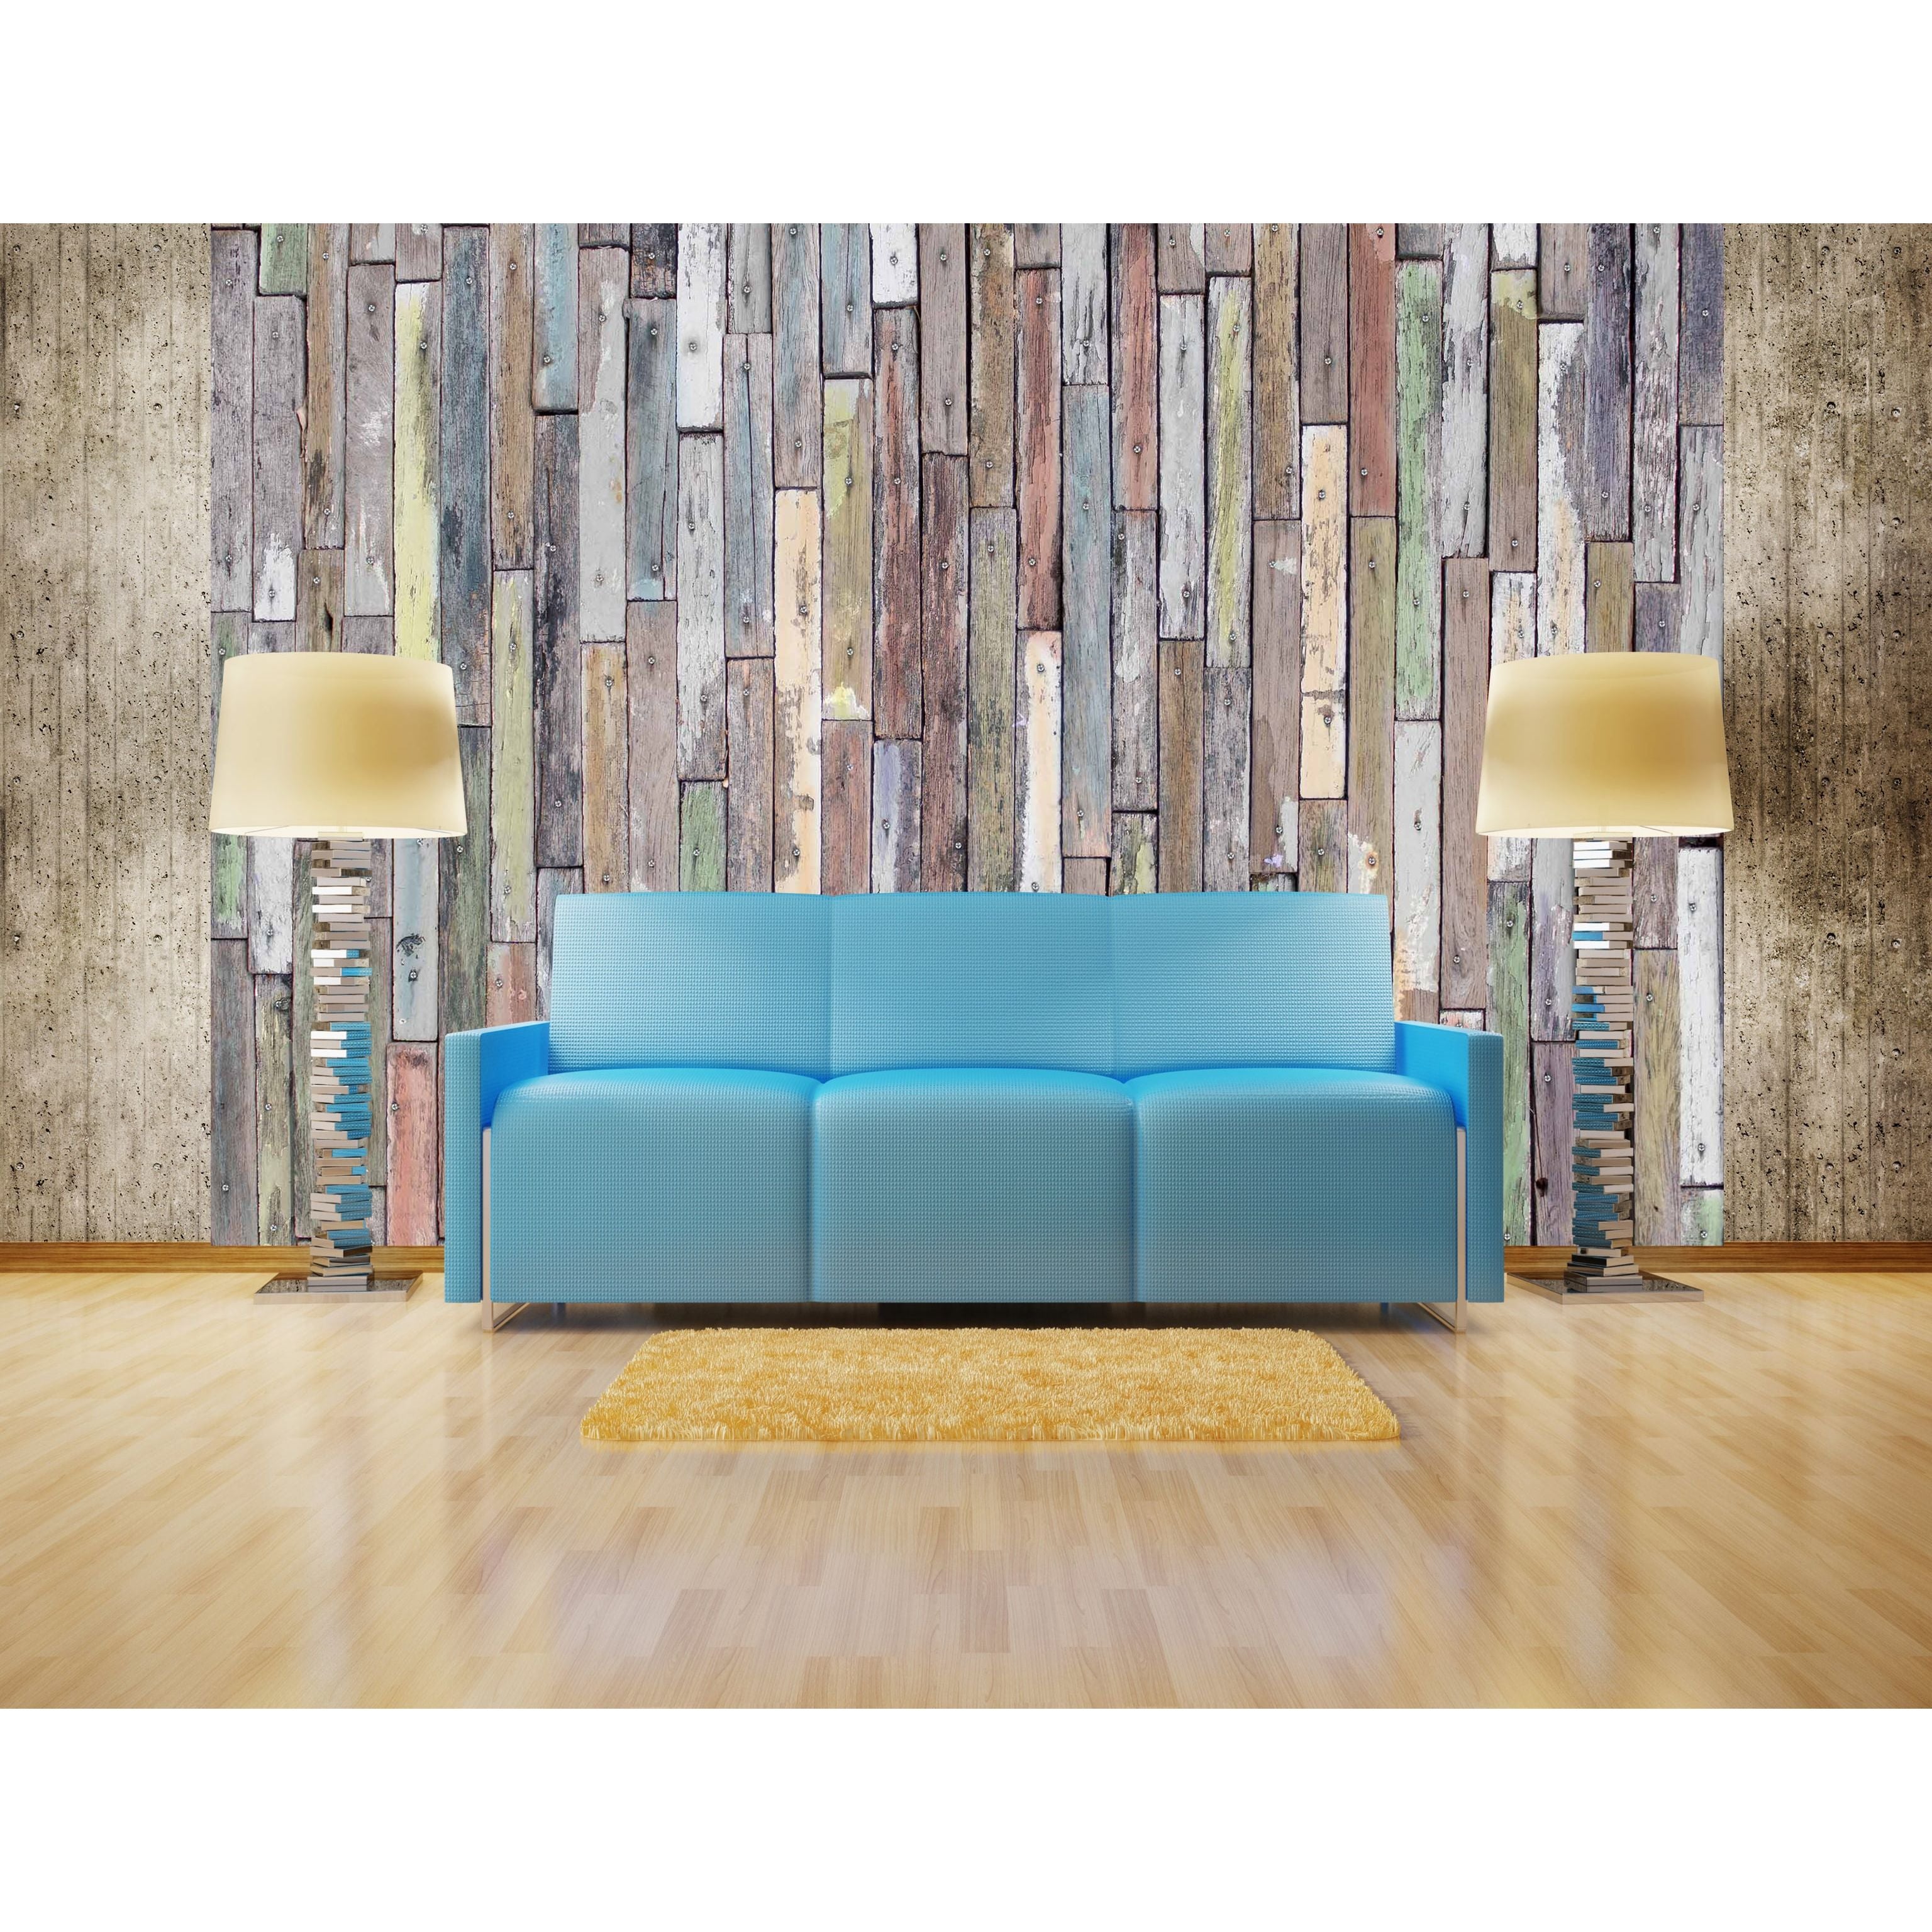 Colorful Wooden Rectangles: Vibrant Wall Mural Design